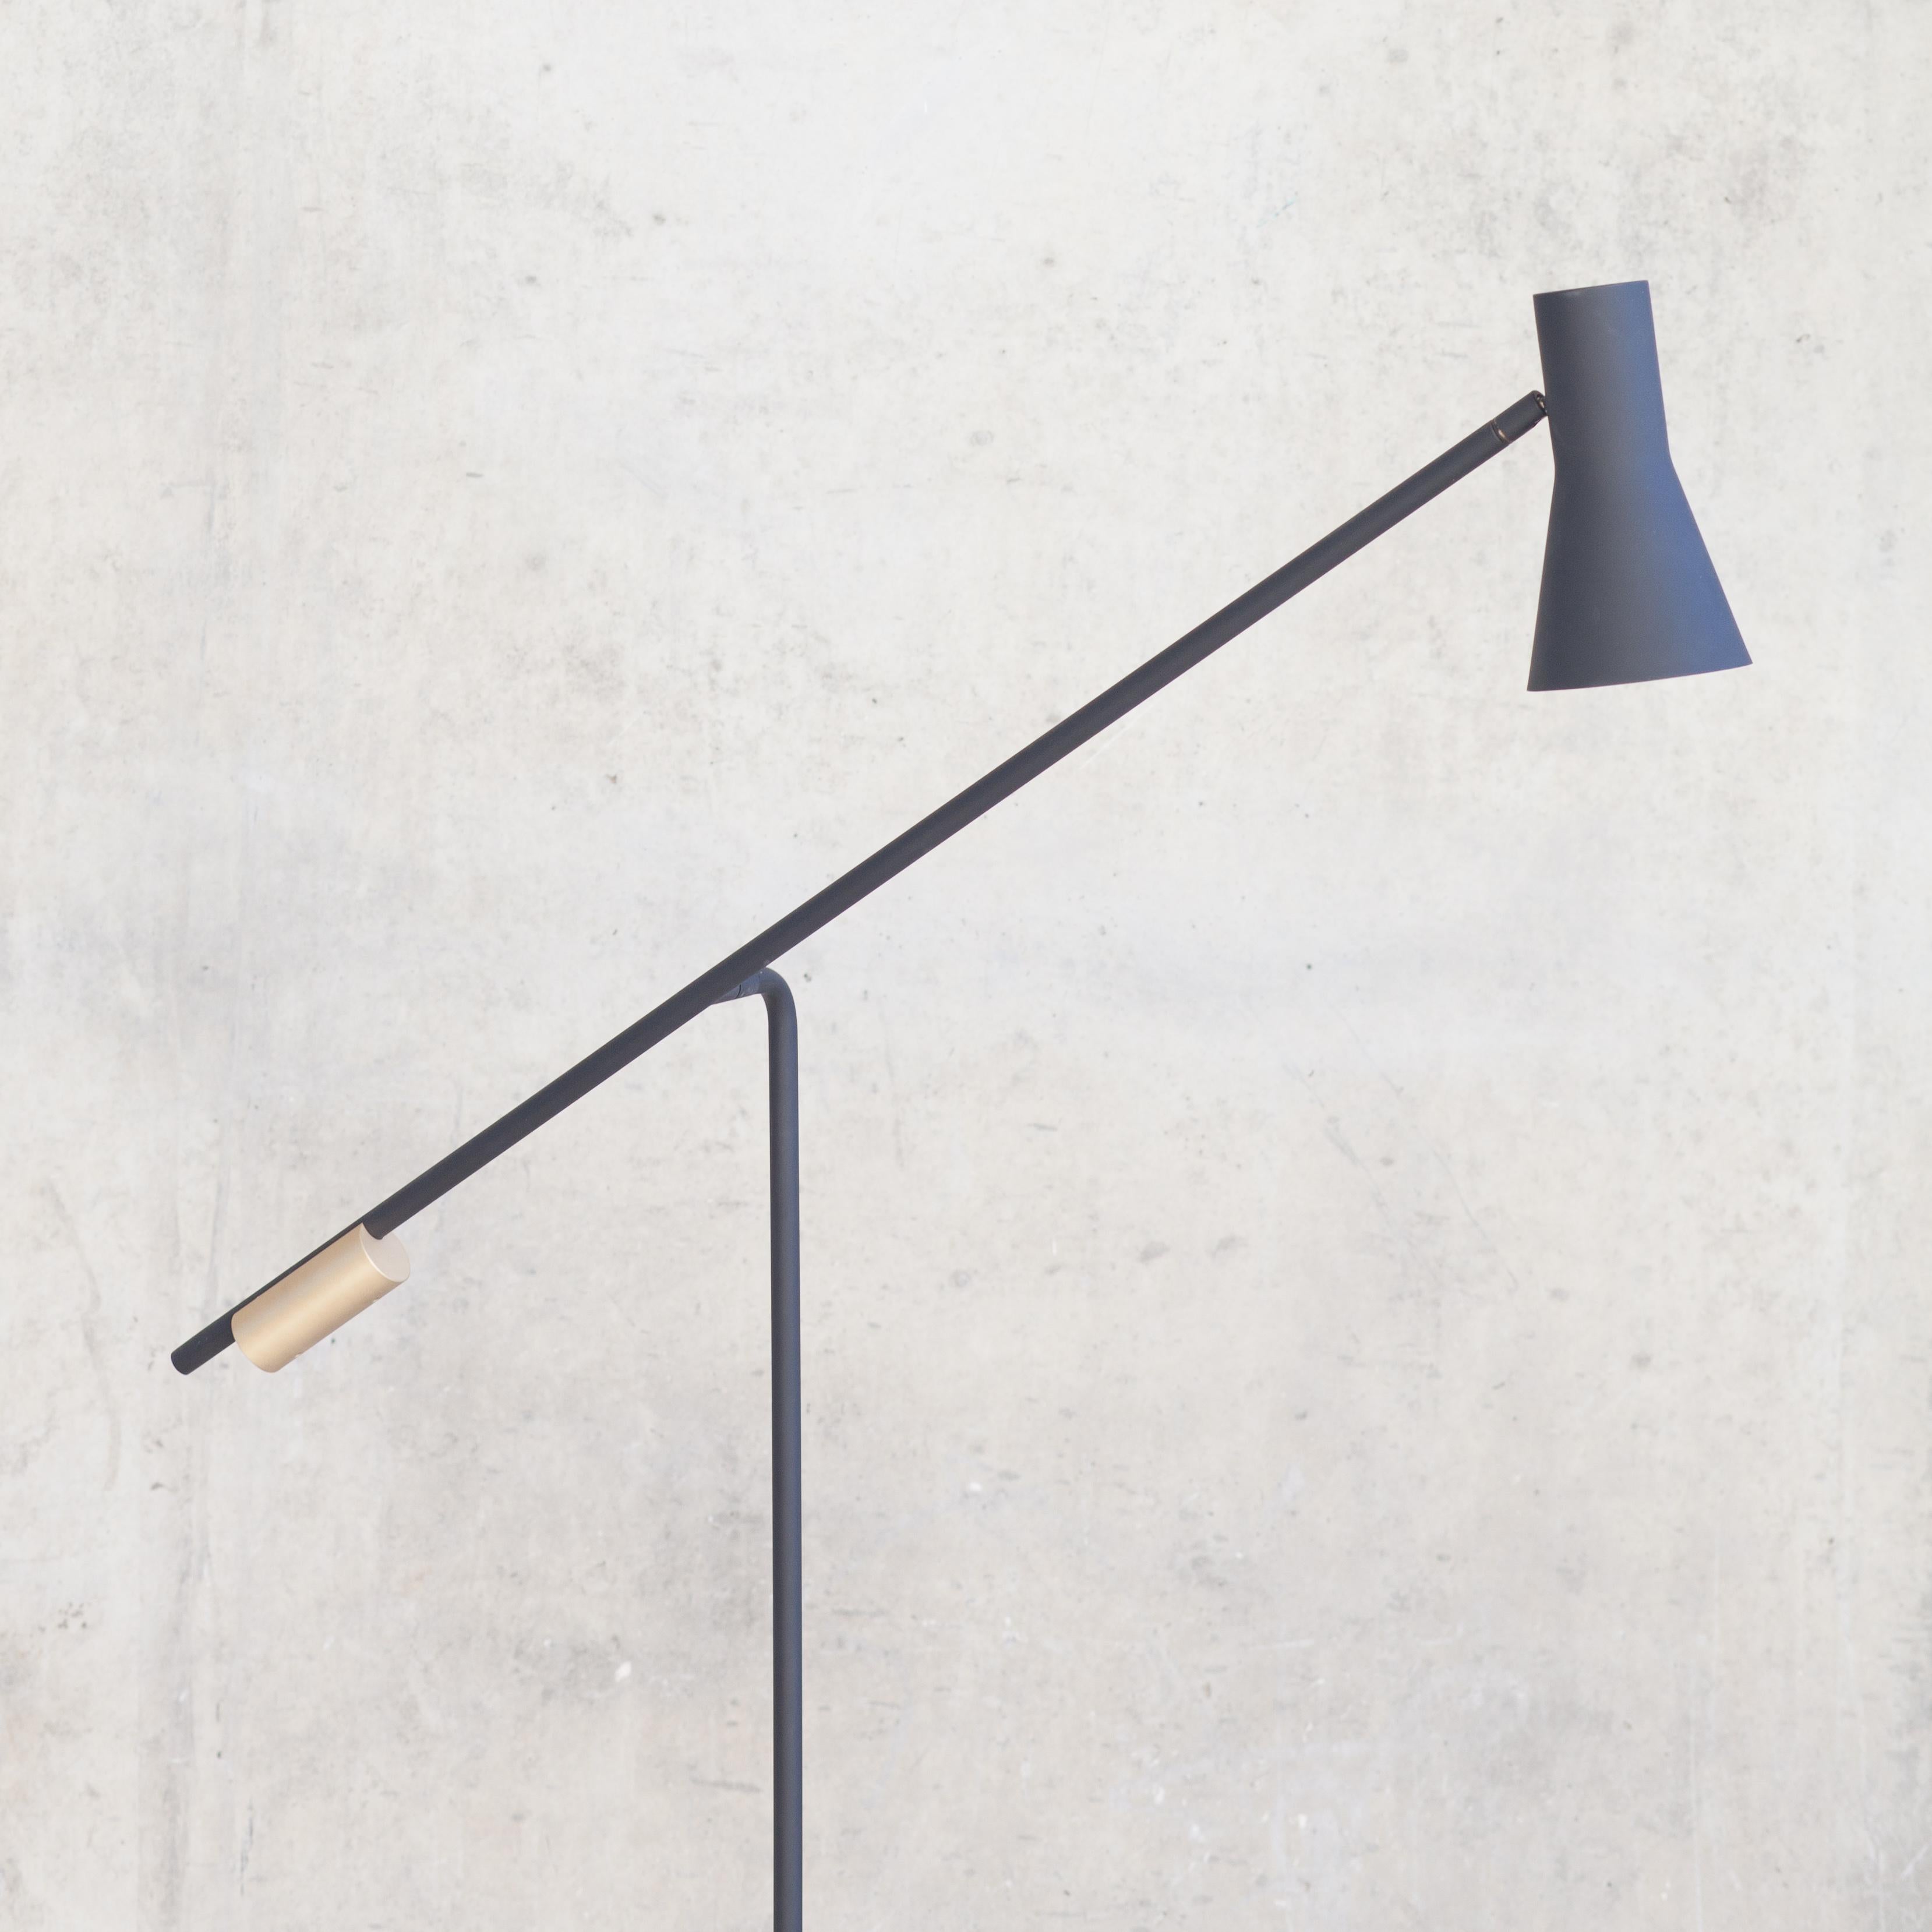 Lutz means light in the language of Gascony – an obvious choice of name for this lamp. The design centers on a circular theme. Lutz marries the natural nobility of marble with more metallic brass. A clear reference to the 1950s, this is a timeless